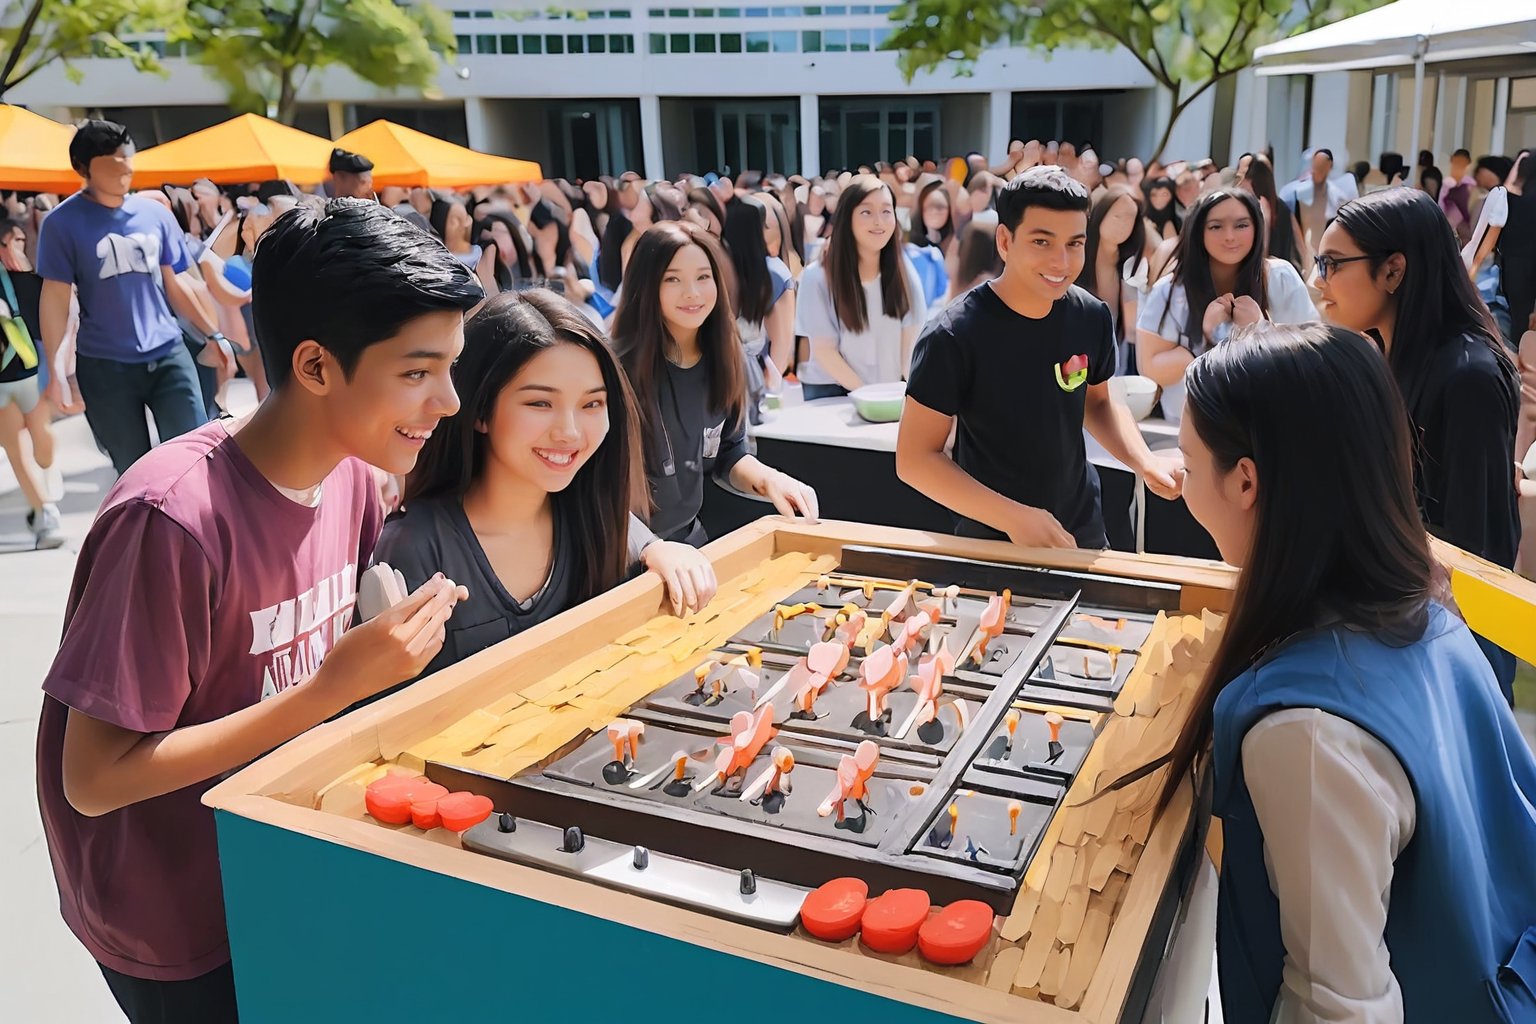 students from diverse backgrounds coming together to enjoy various activities, such as live music performances, art exhibitions, food stalls, and interactive games. Incorporate elements that showcase the energy, creativity, and unity of the student community.
,styr